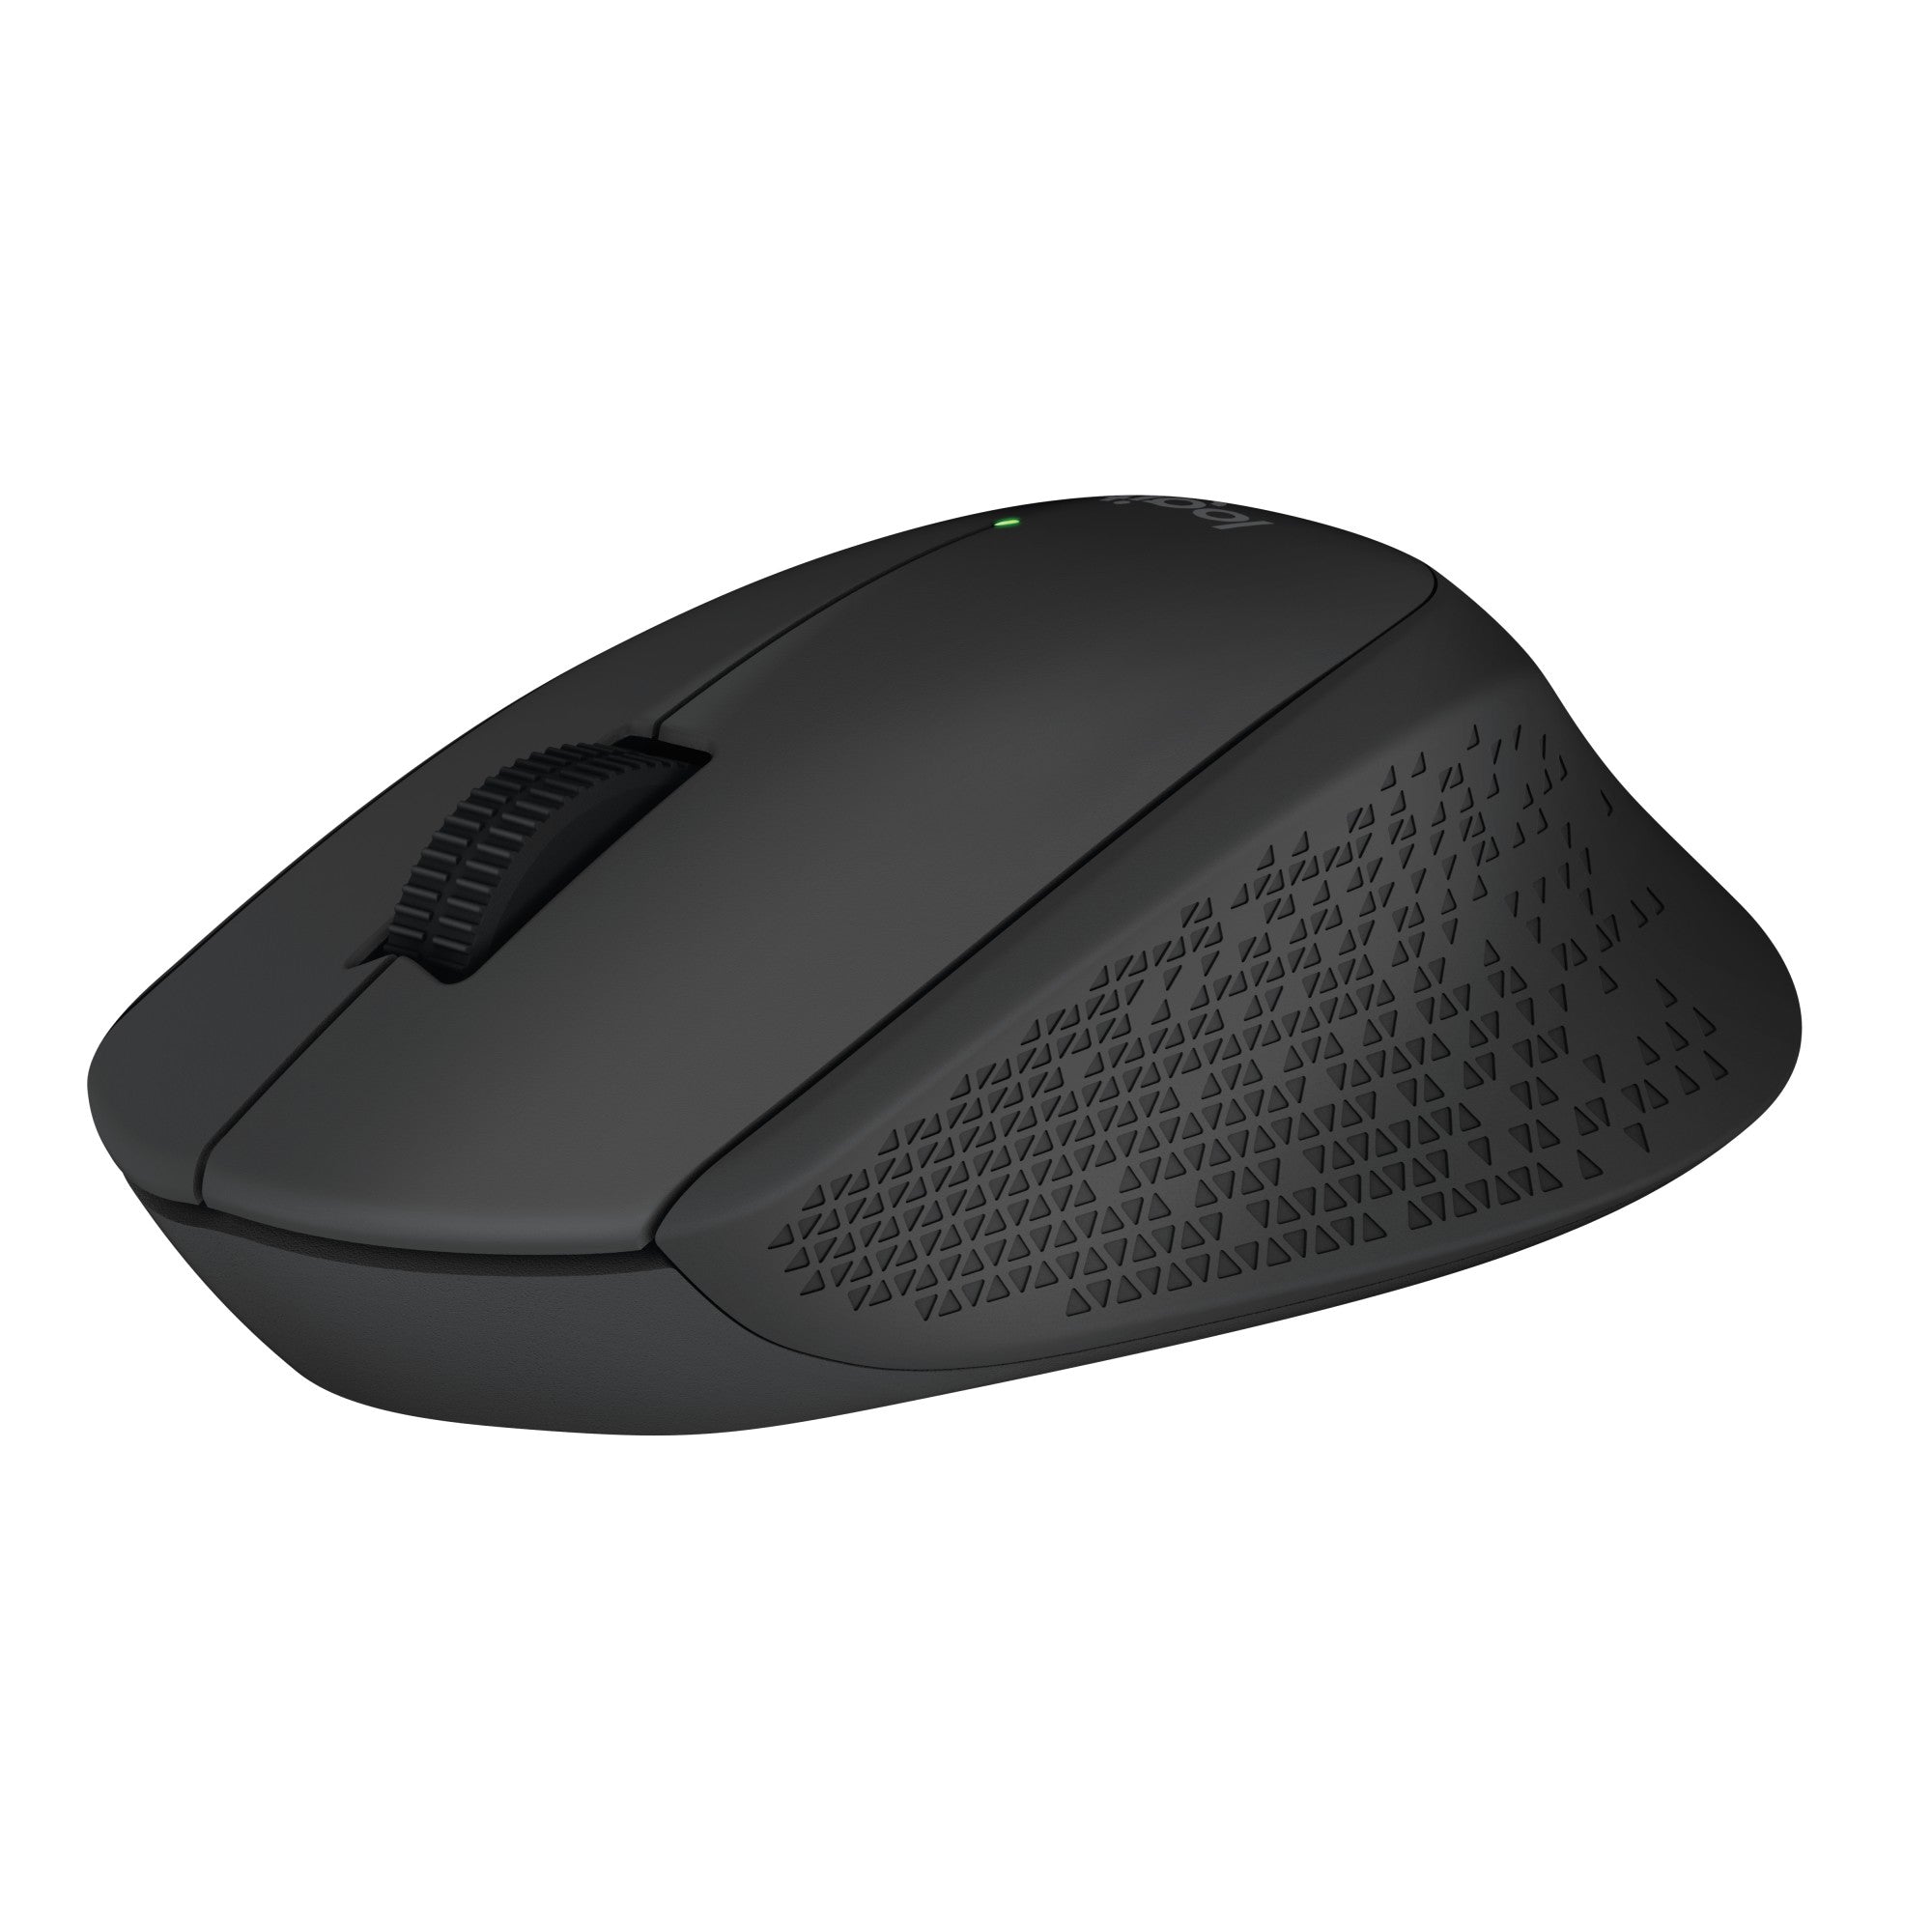 Logitech M280 mouse Wireless 910-004287 - Albagame